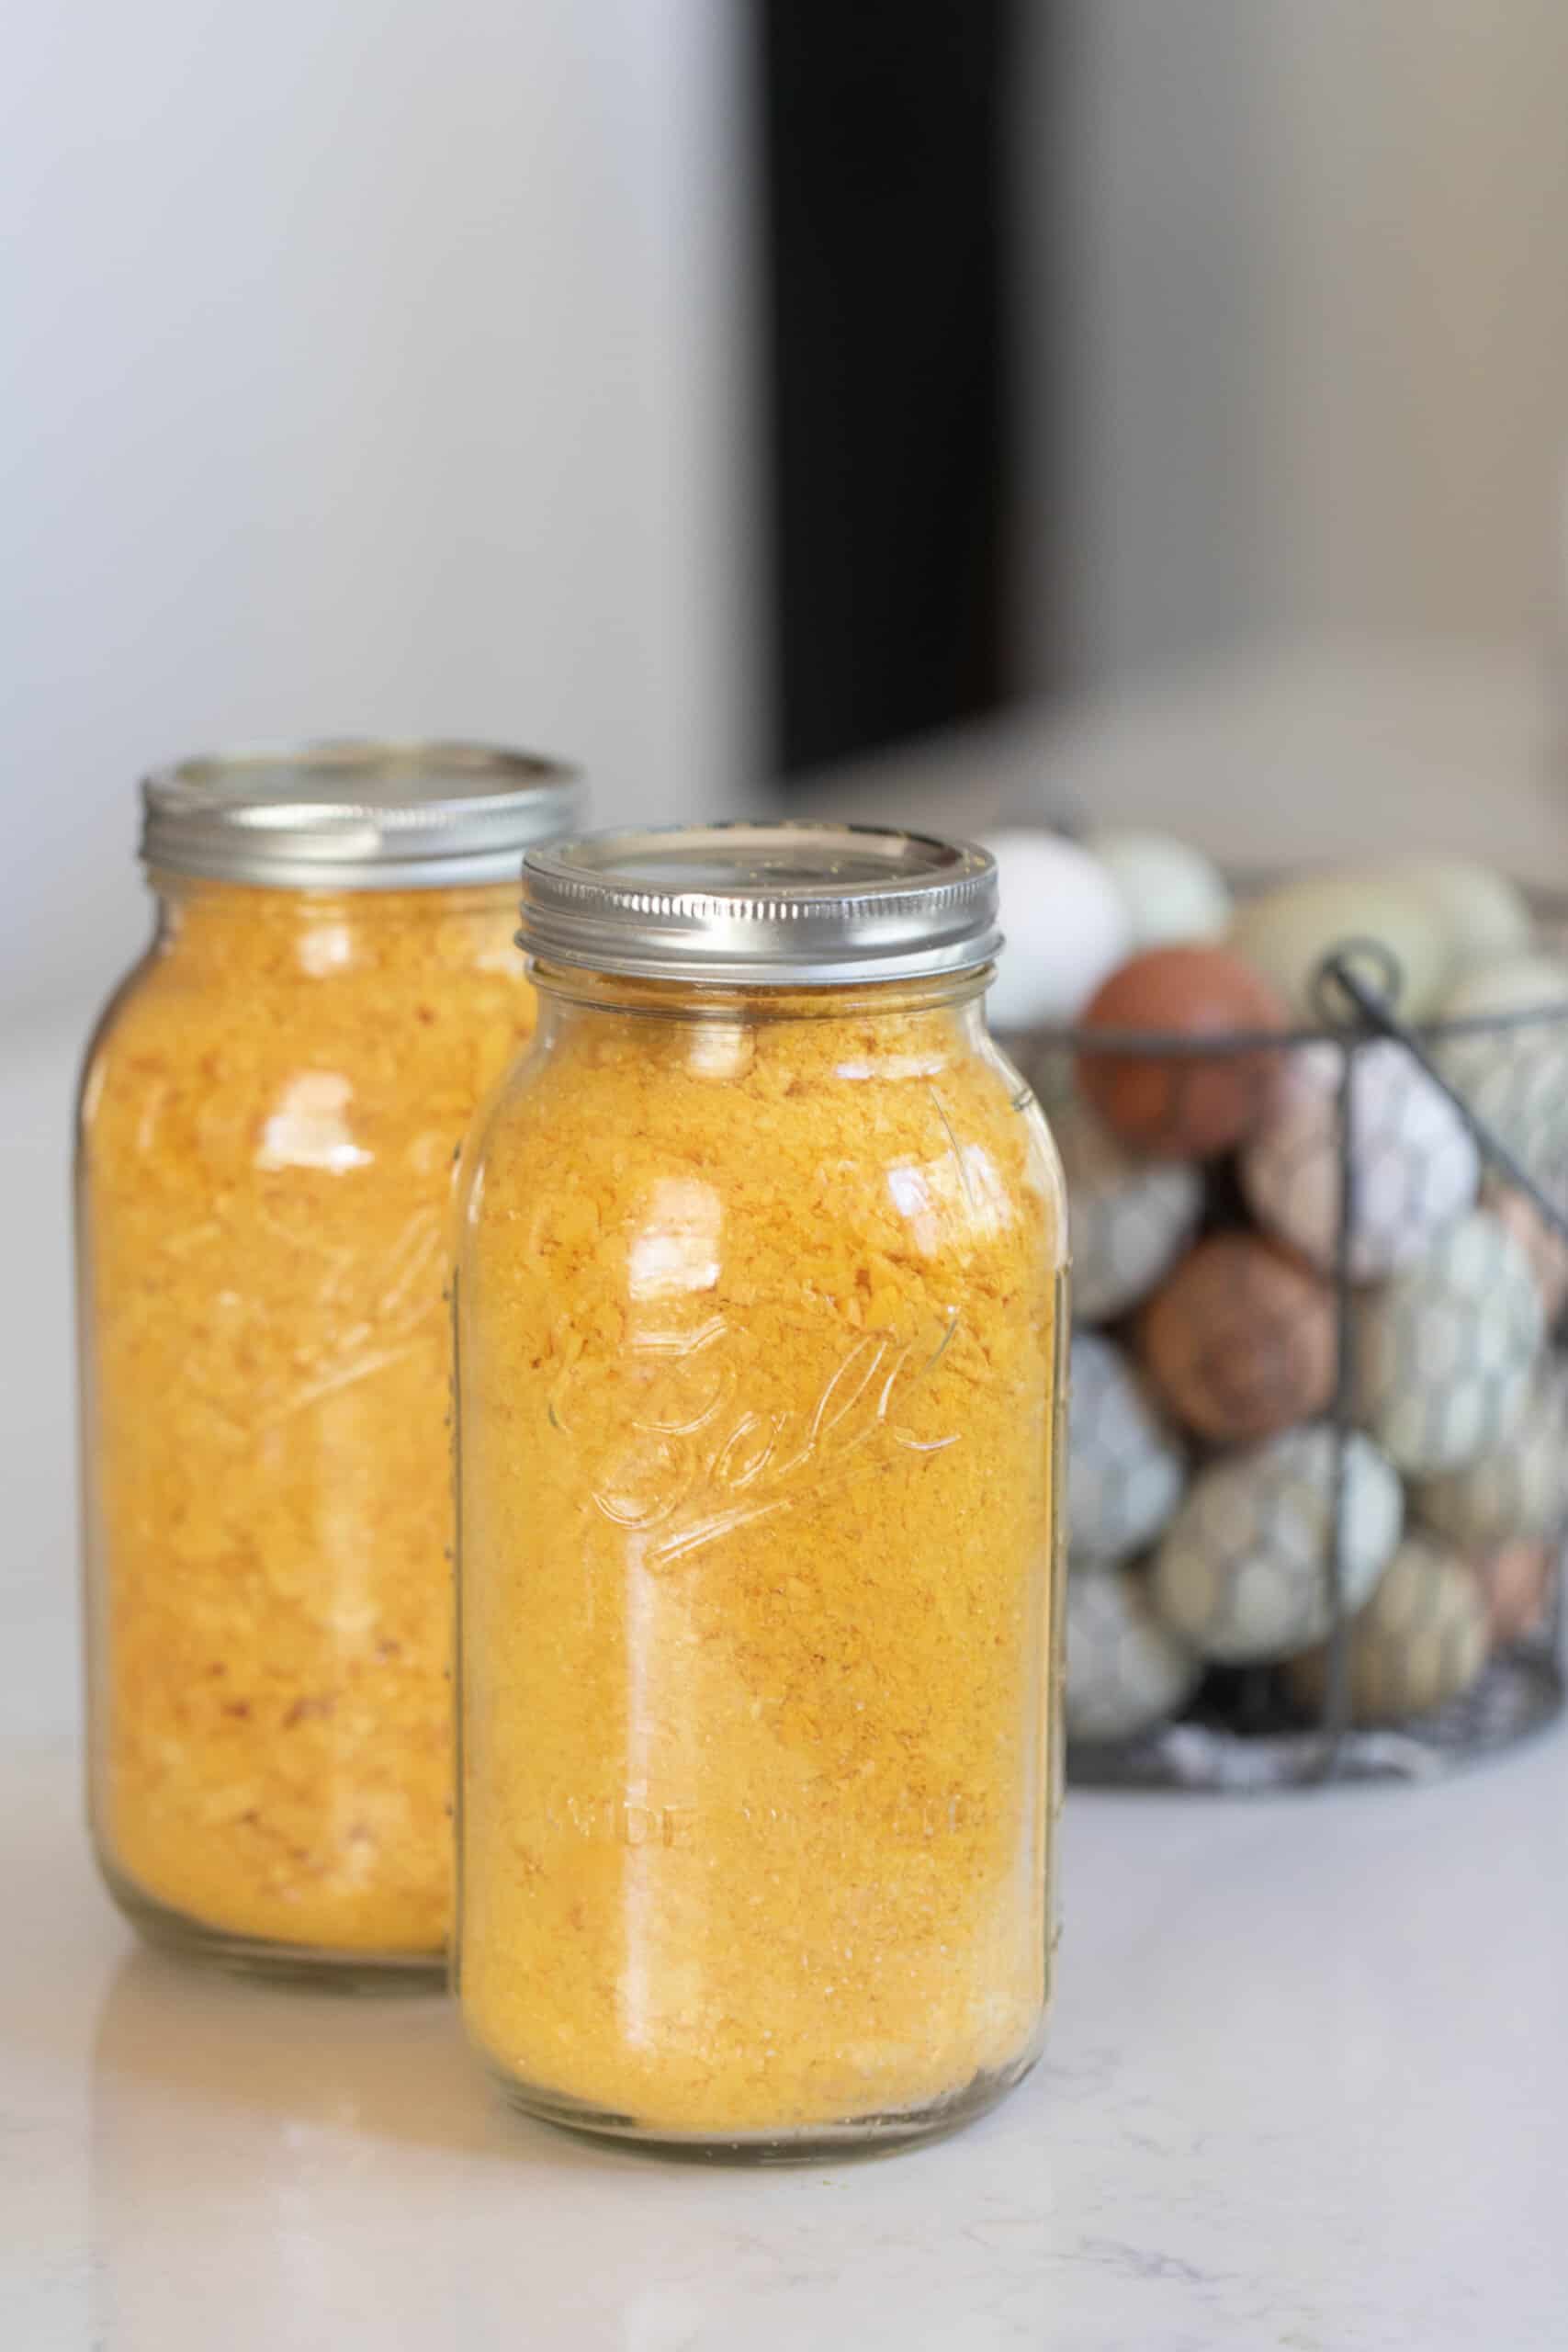 https://www.farmhouseonboone.com/wp-content/uploads/2022/09/freeze-drying-eggs-12-scaled.jpg